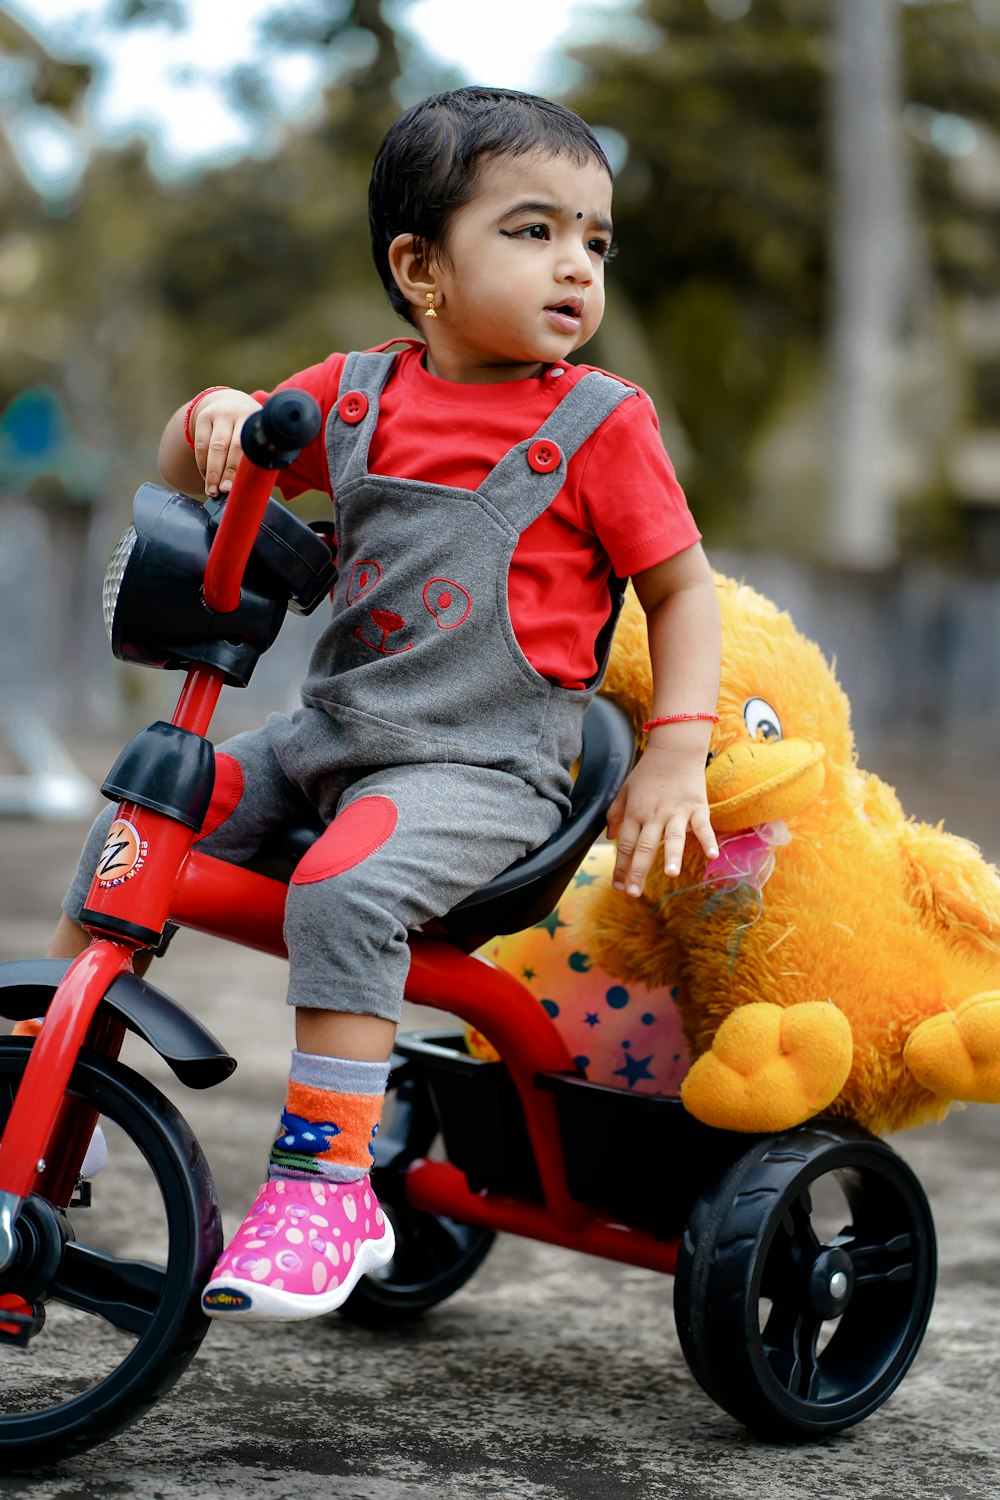 child in blue and red onesie riding on red bicycle